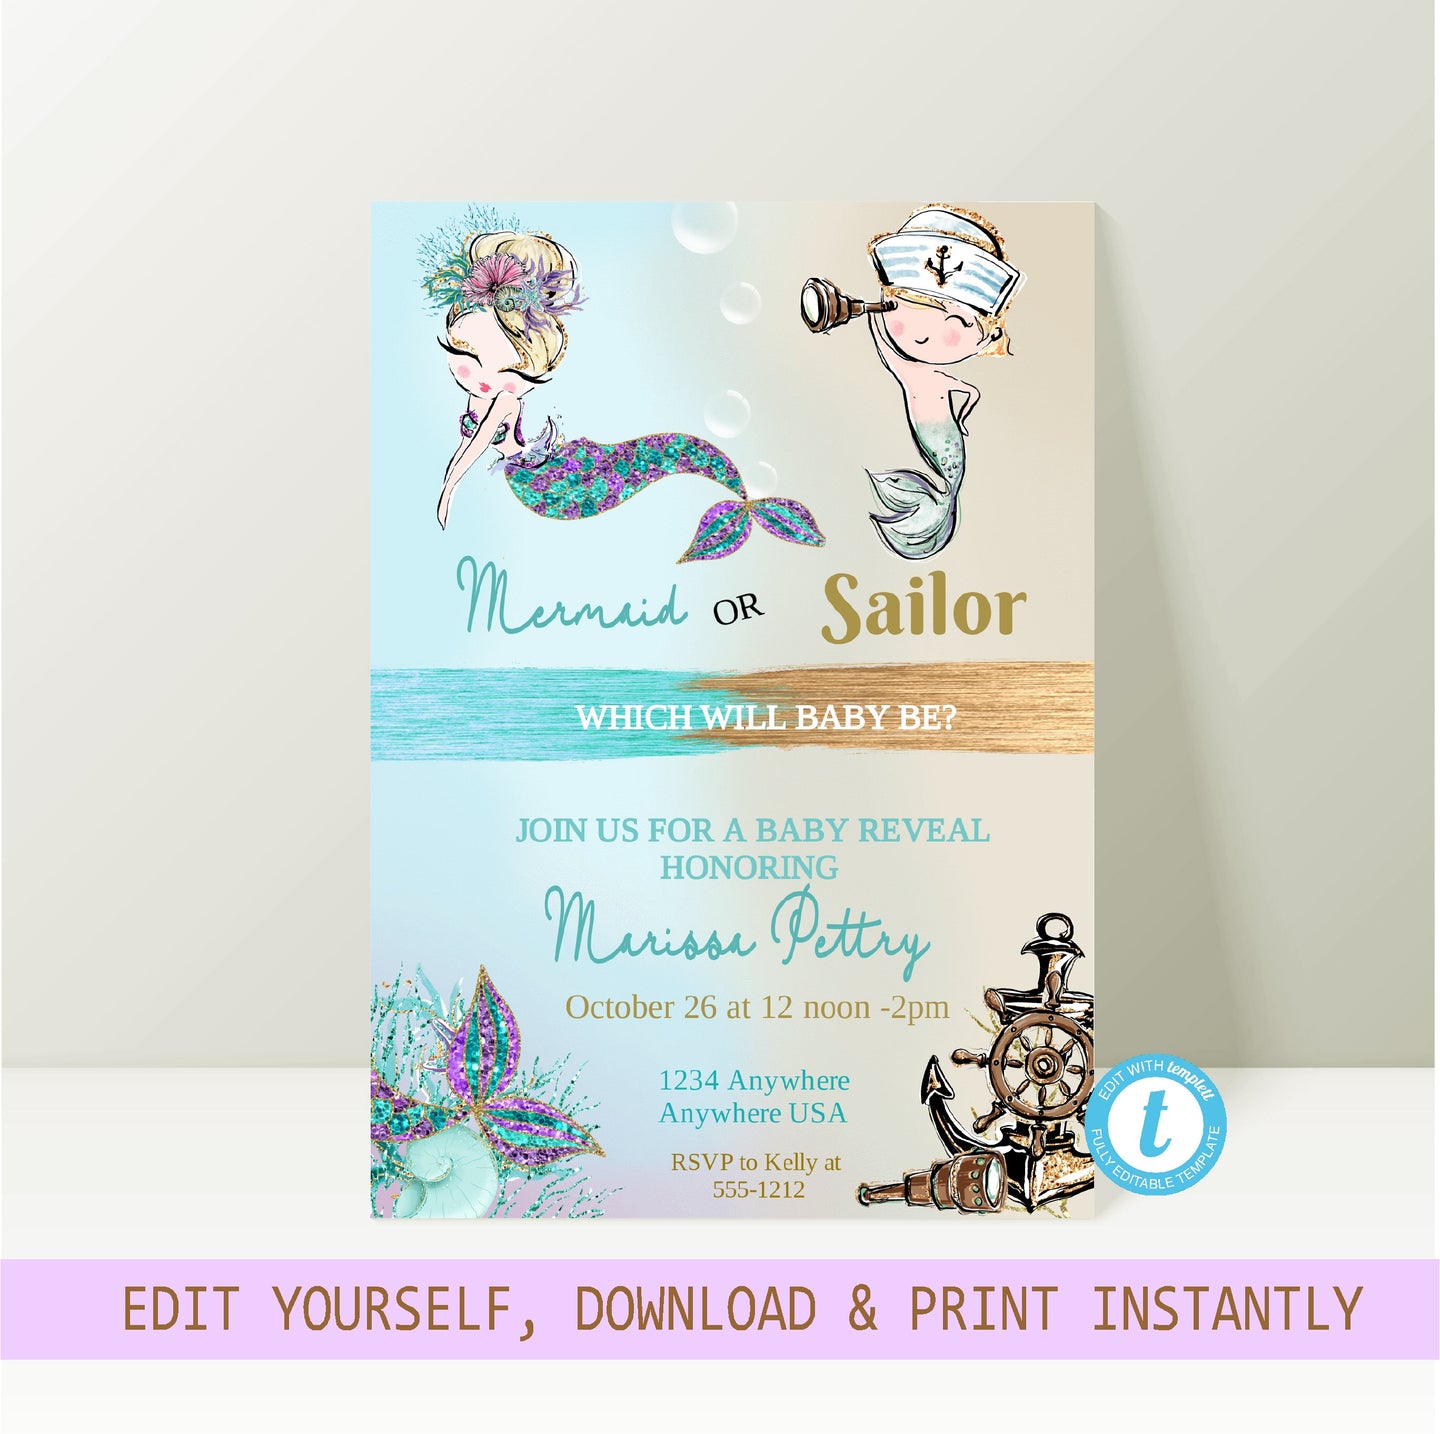 Mermaid or Sailor Gender Reveal Invitation, Sailor Nautical Gender Reveal Party Invite, Glitter, He or She What Will Baby be edit yourself